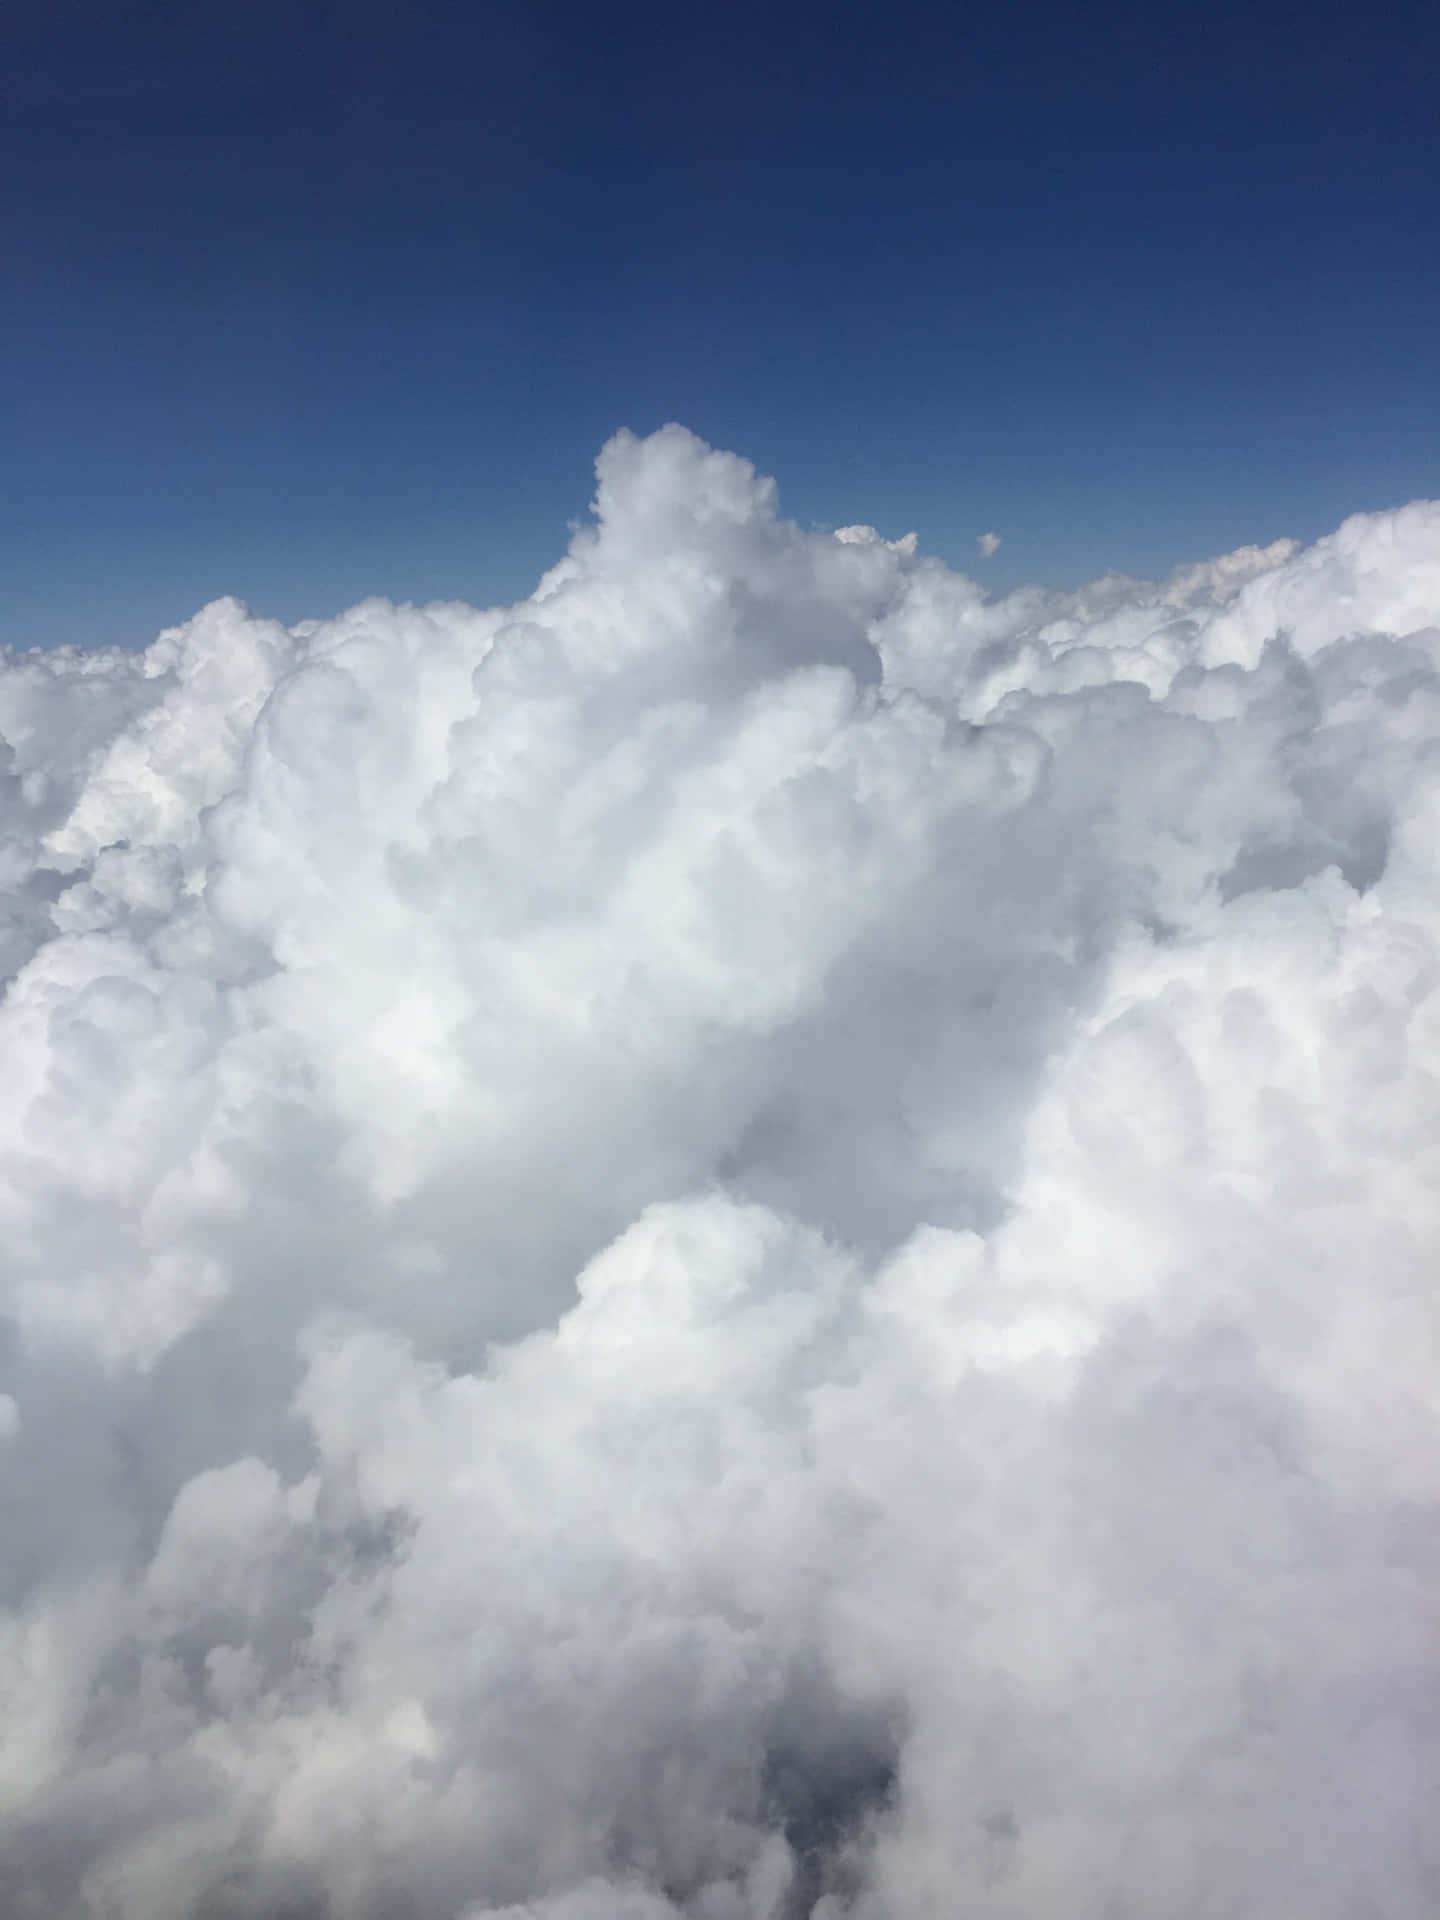 A picture of a vast plush white cloud formation